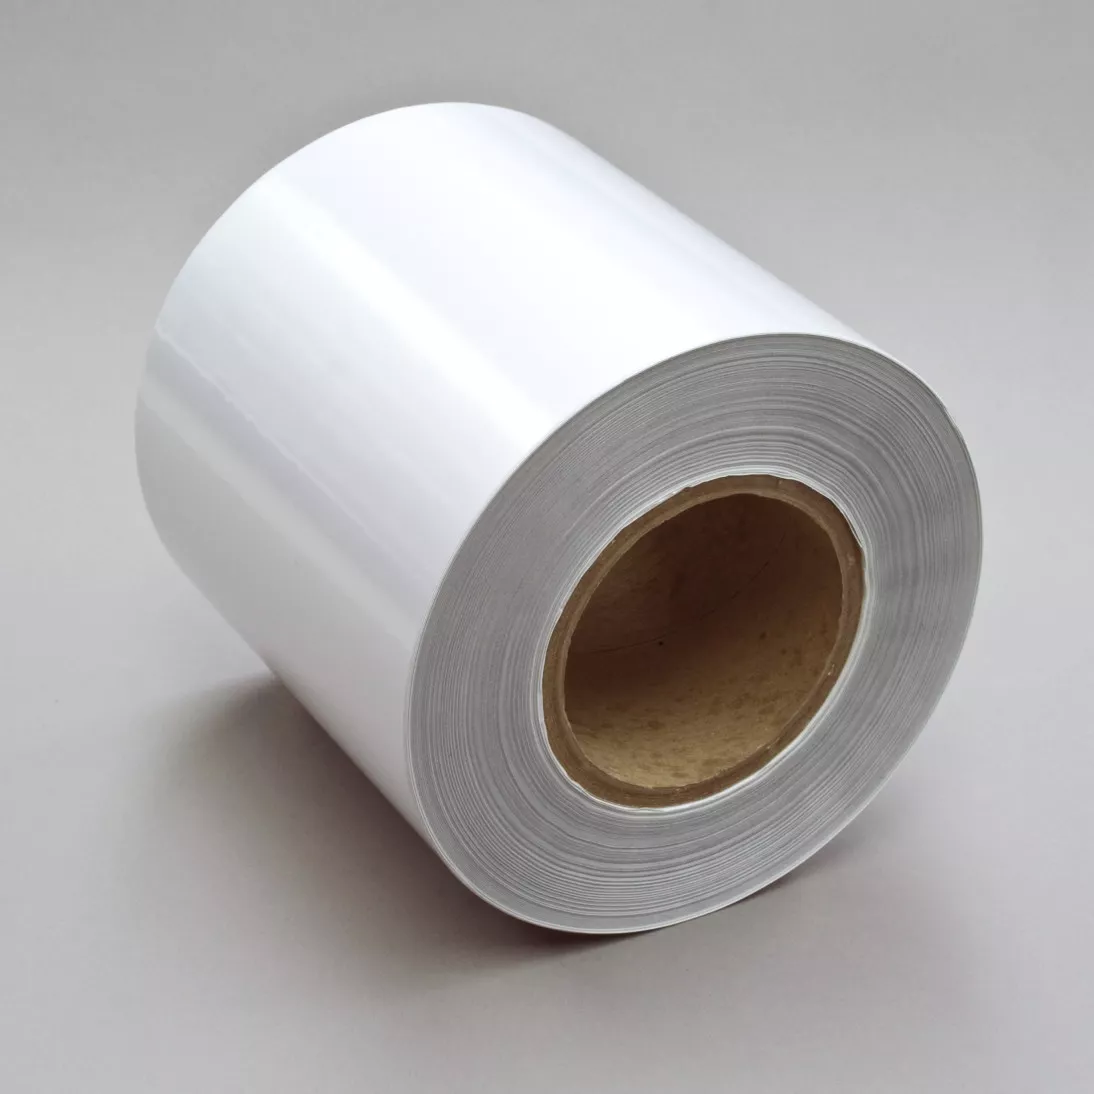 3M™ Thermal Transfer Label Material 7872, Platinum Polyester Gloss, 6 in
x 1668 ft, 1 roll per case